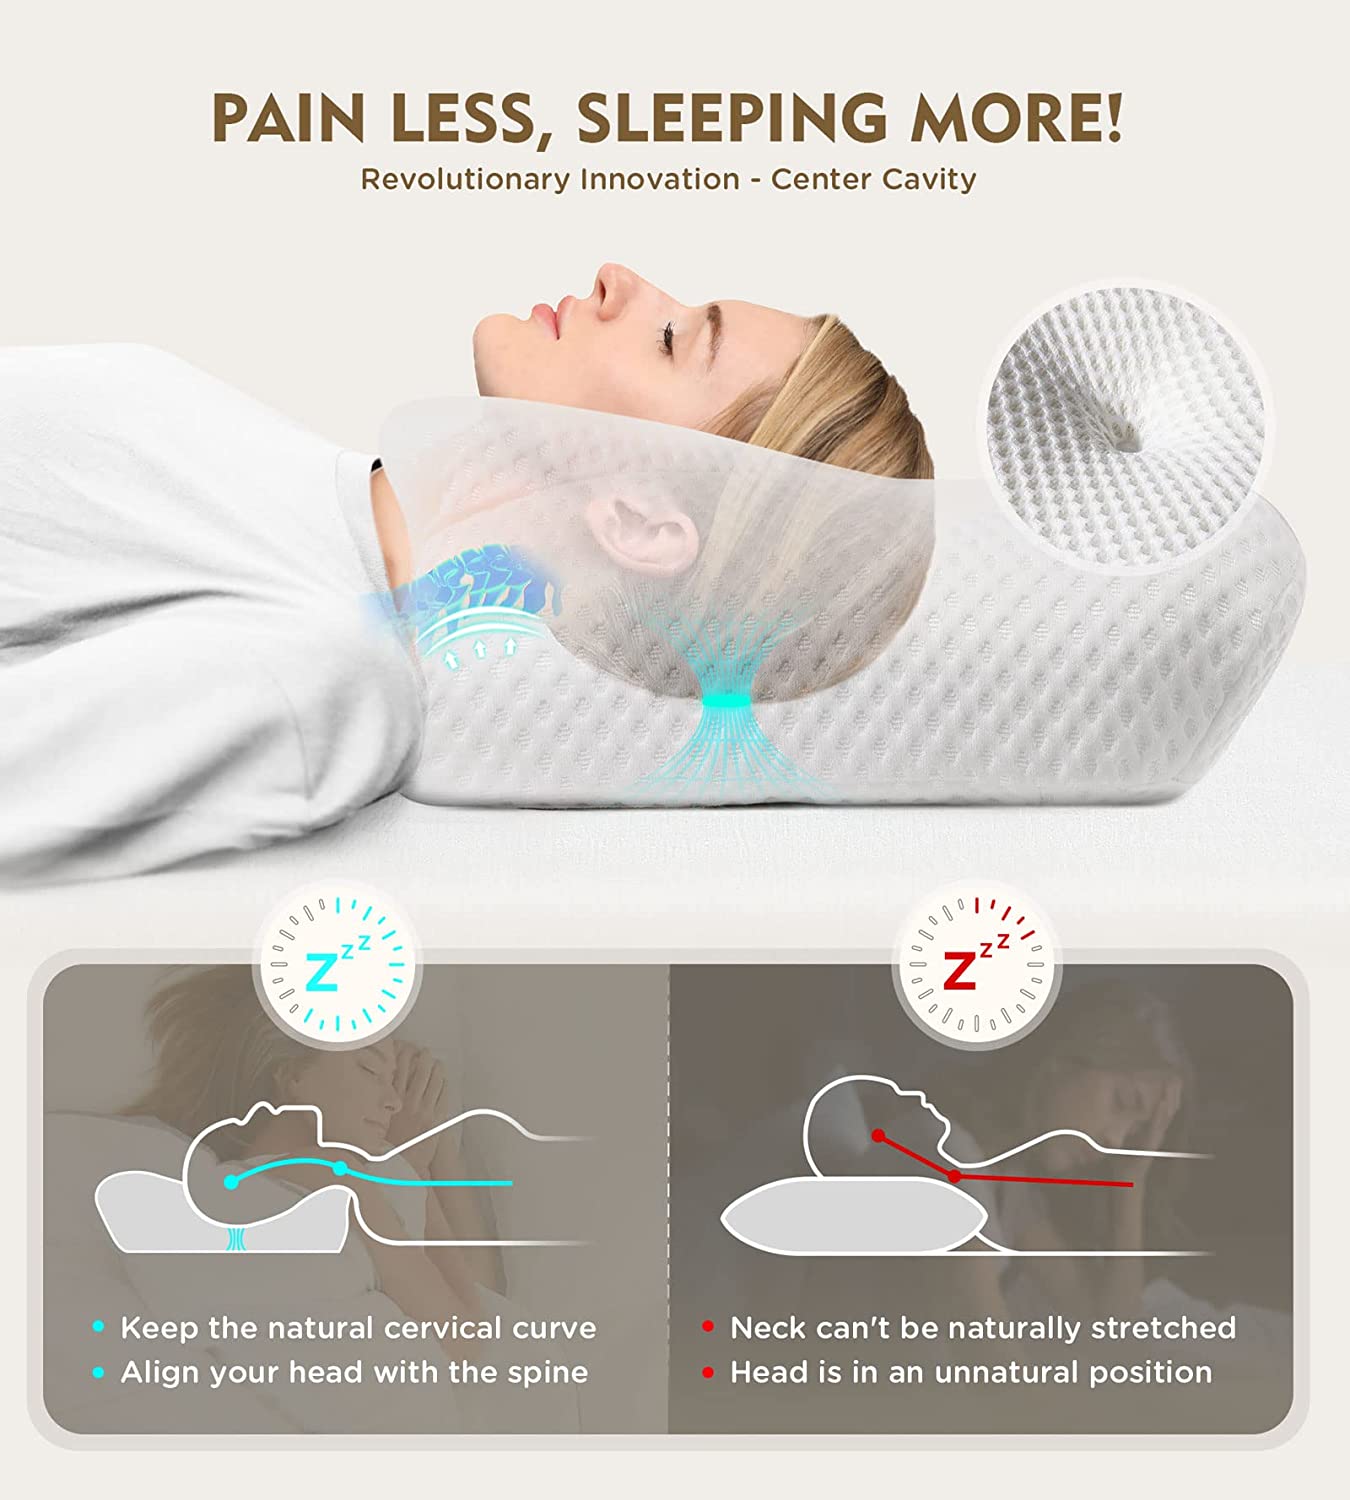 Osteo Cervical Pillow for Neck Pain Relief  Hollow Design Odorless Memory Foam Pillows with Cooling Case  Adjustable Orthopedic Bed Pillow for Sleeping  Contour Support for Side Back Stom